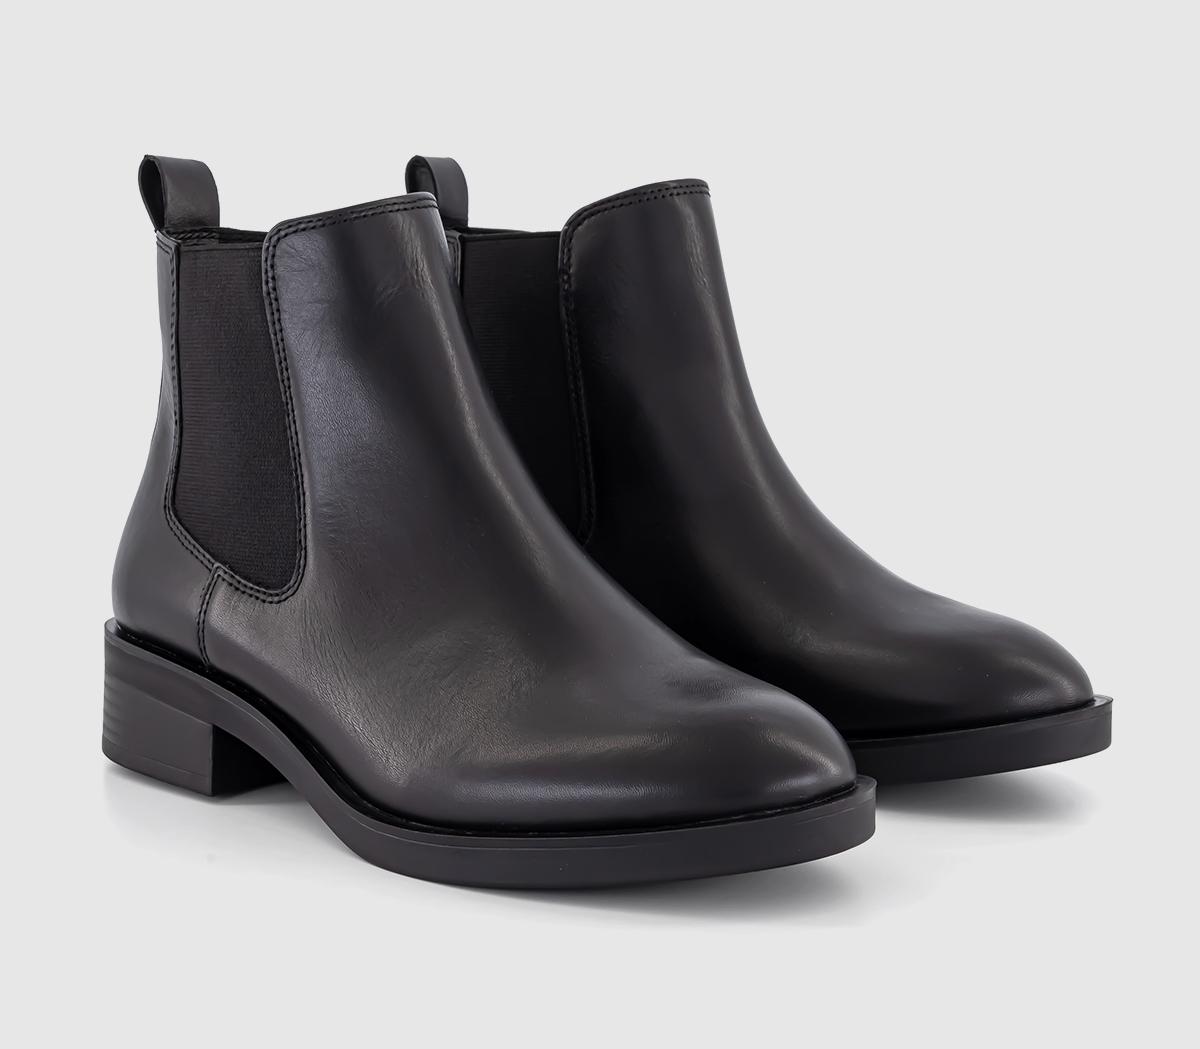 OFFICE Avatar Clean Sole Chelsea Boots Black Leather - Women's Ankle Boots